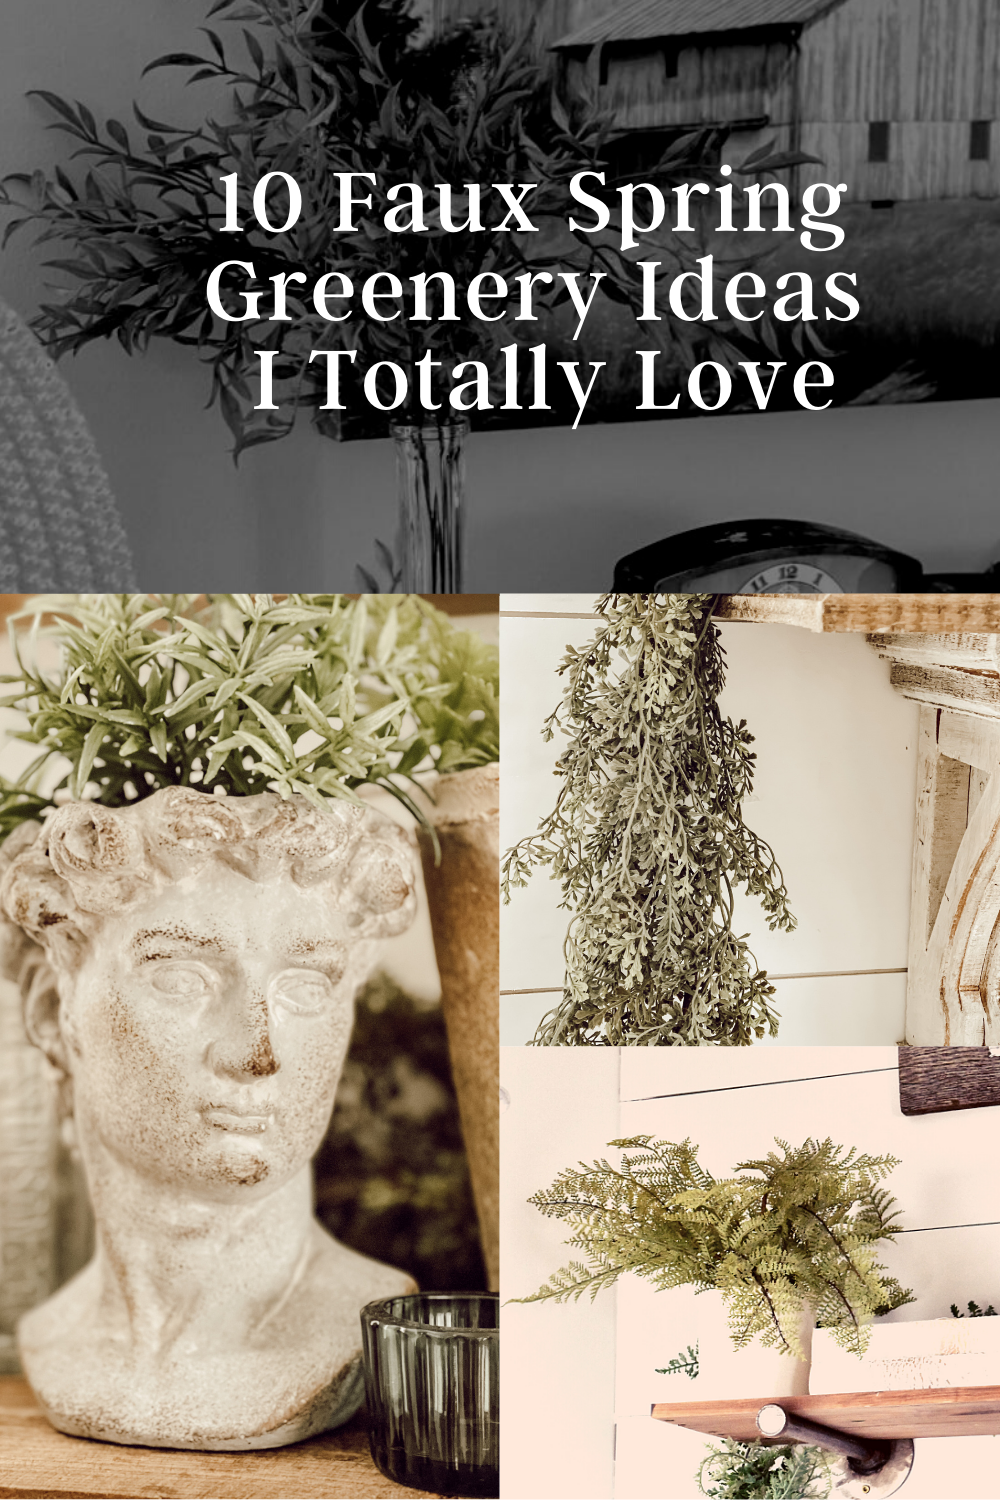 10 Faux Spring Greenery Ideas I Totally Love